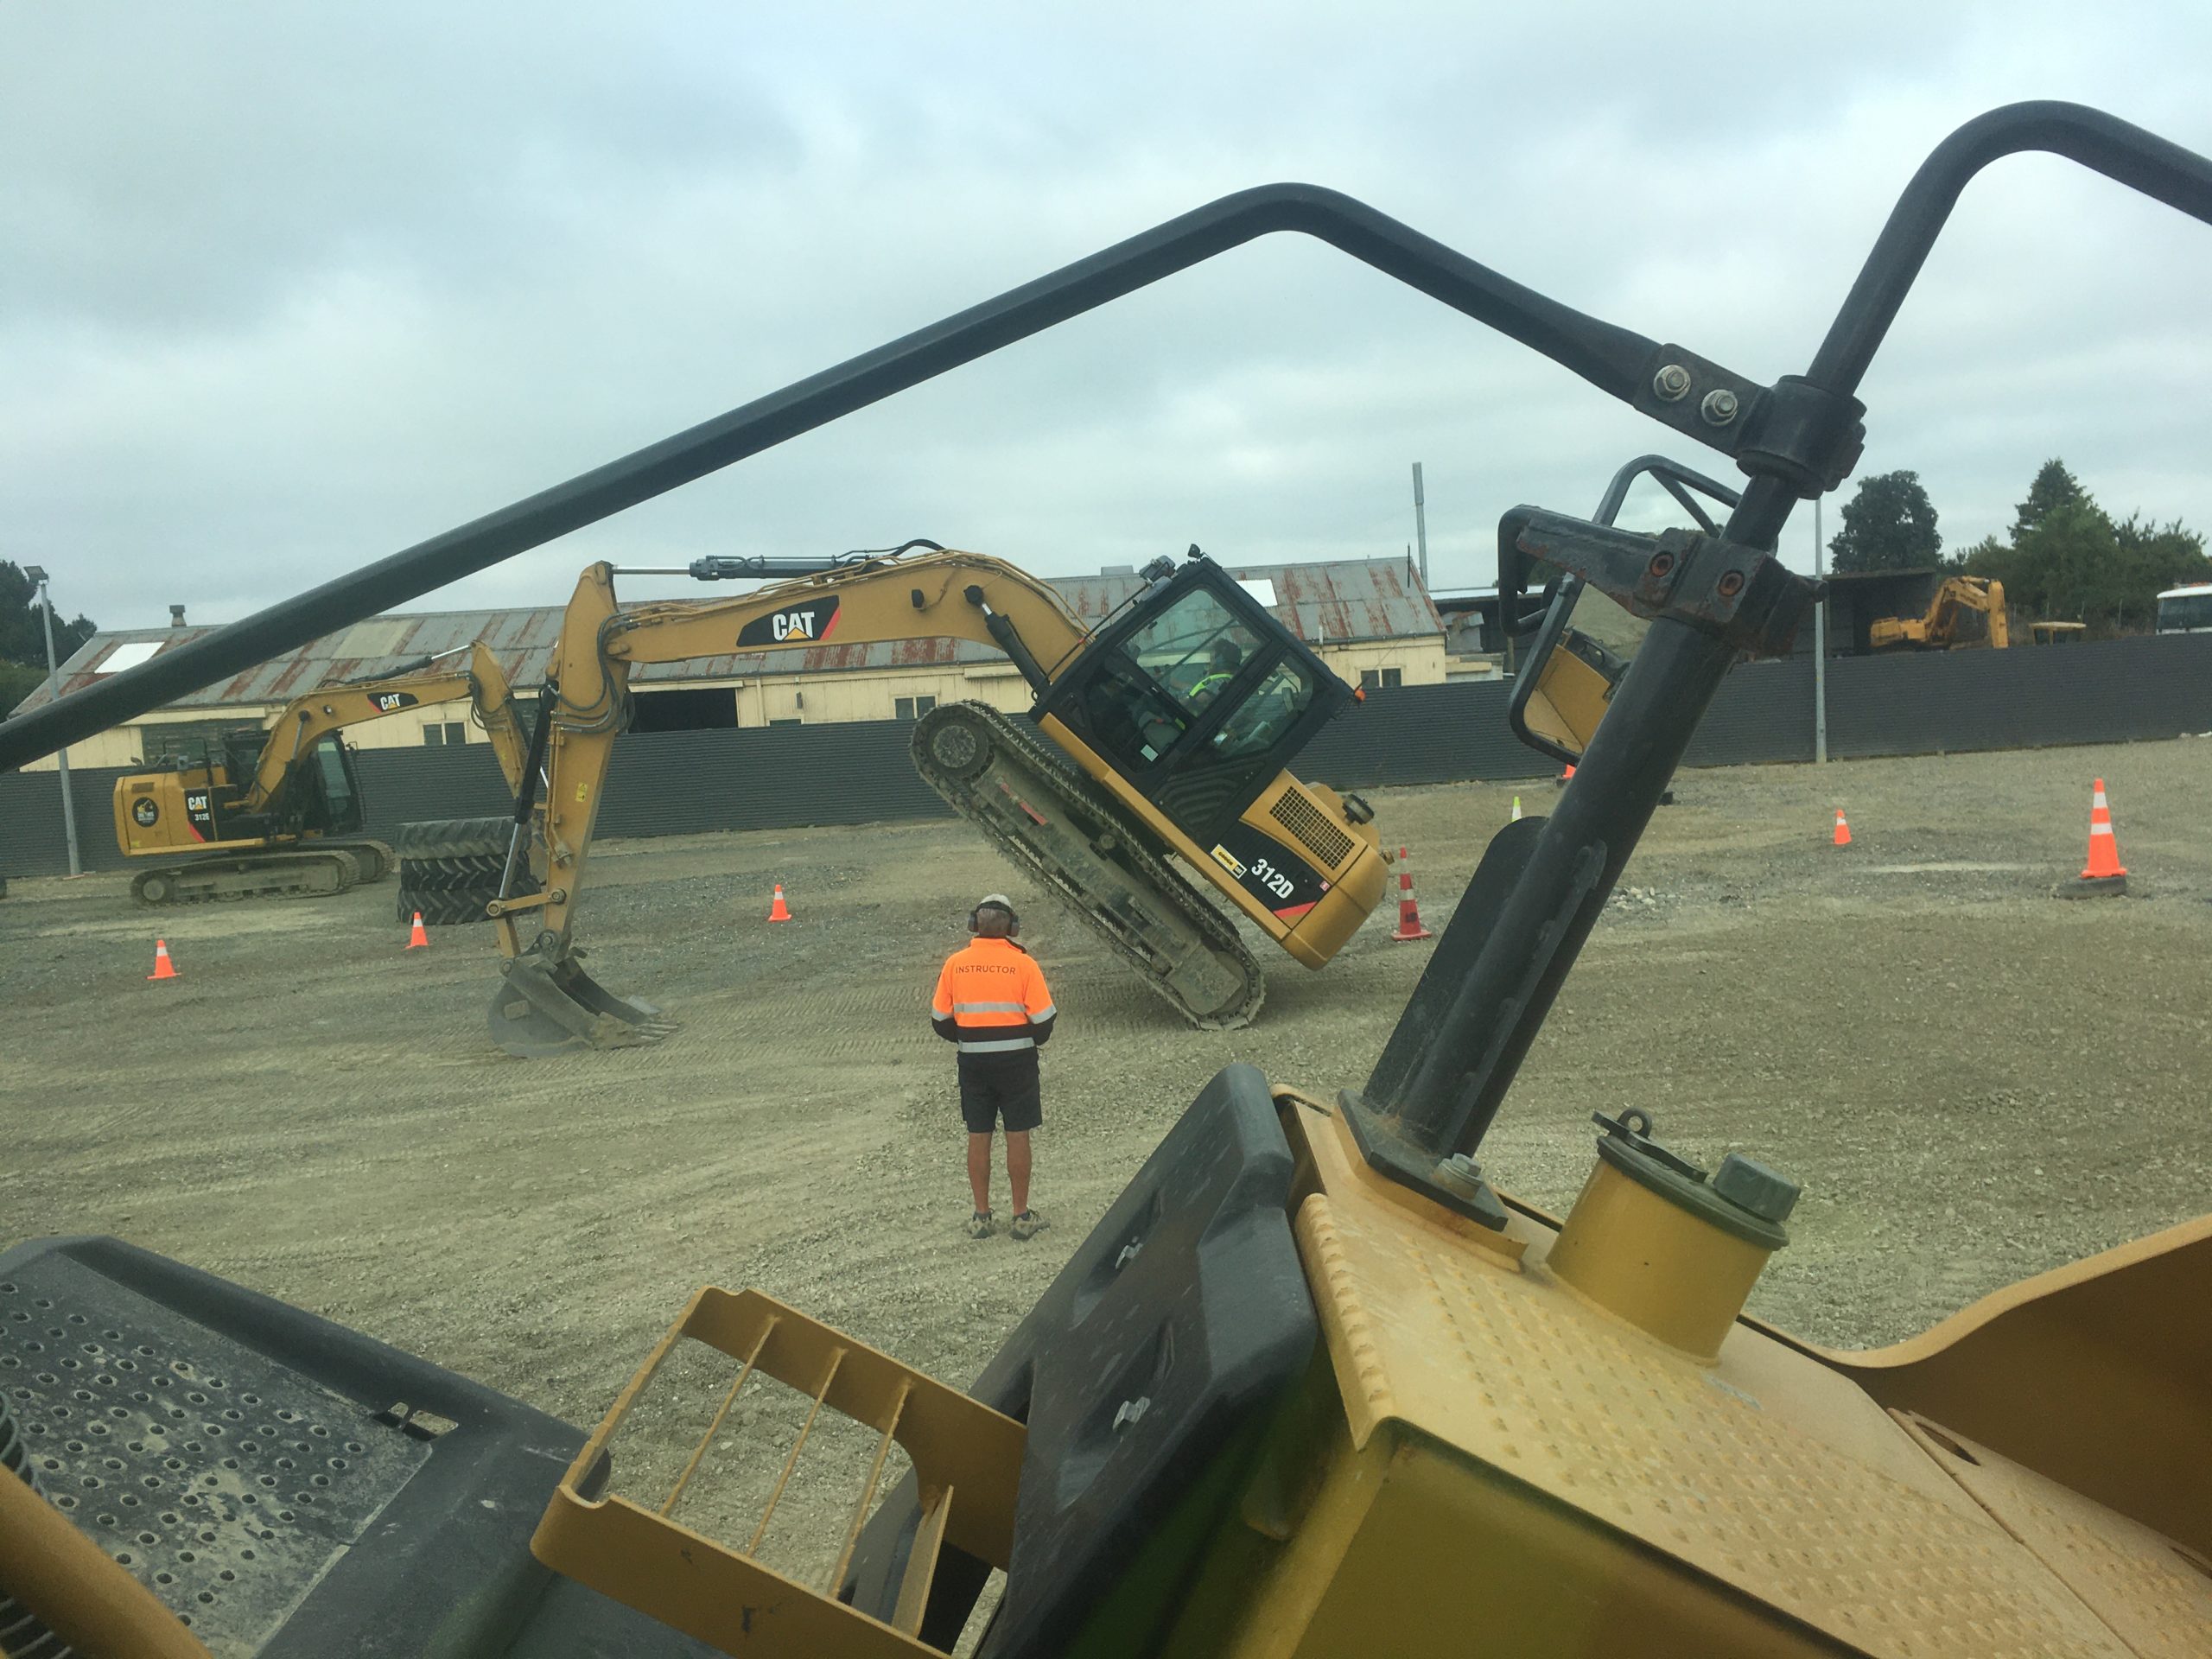 My son in the other digger doing a 'handstand' at Dig This, Invercargill